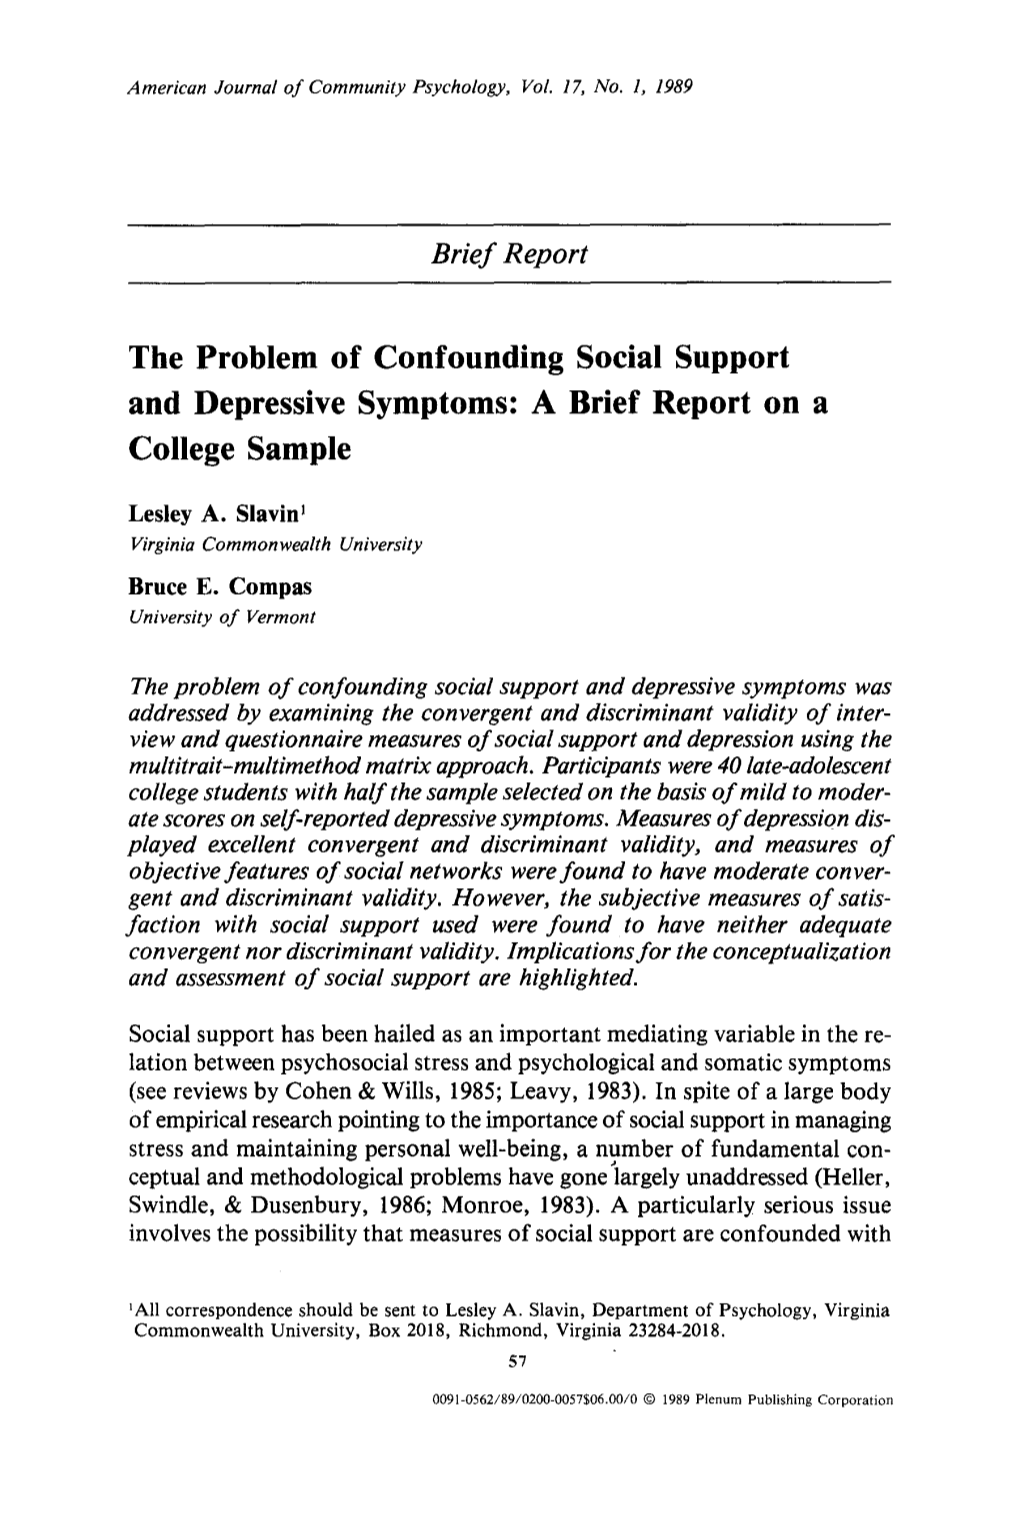 The Problem of Confounding Social Support and Depressive Symptoms: a Brief Report on a College Sample